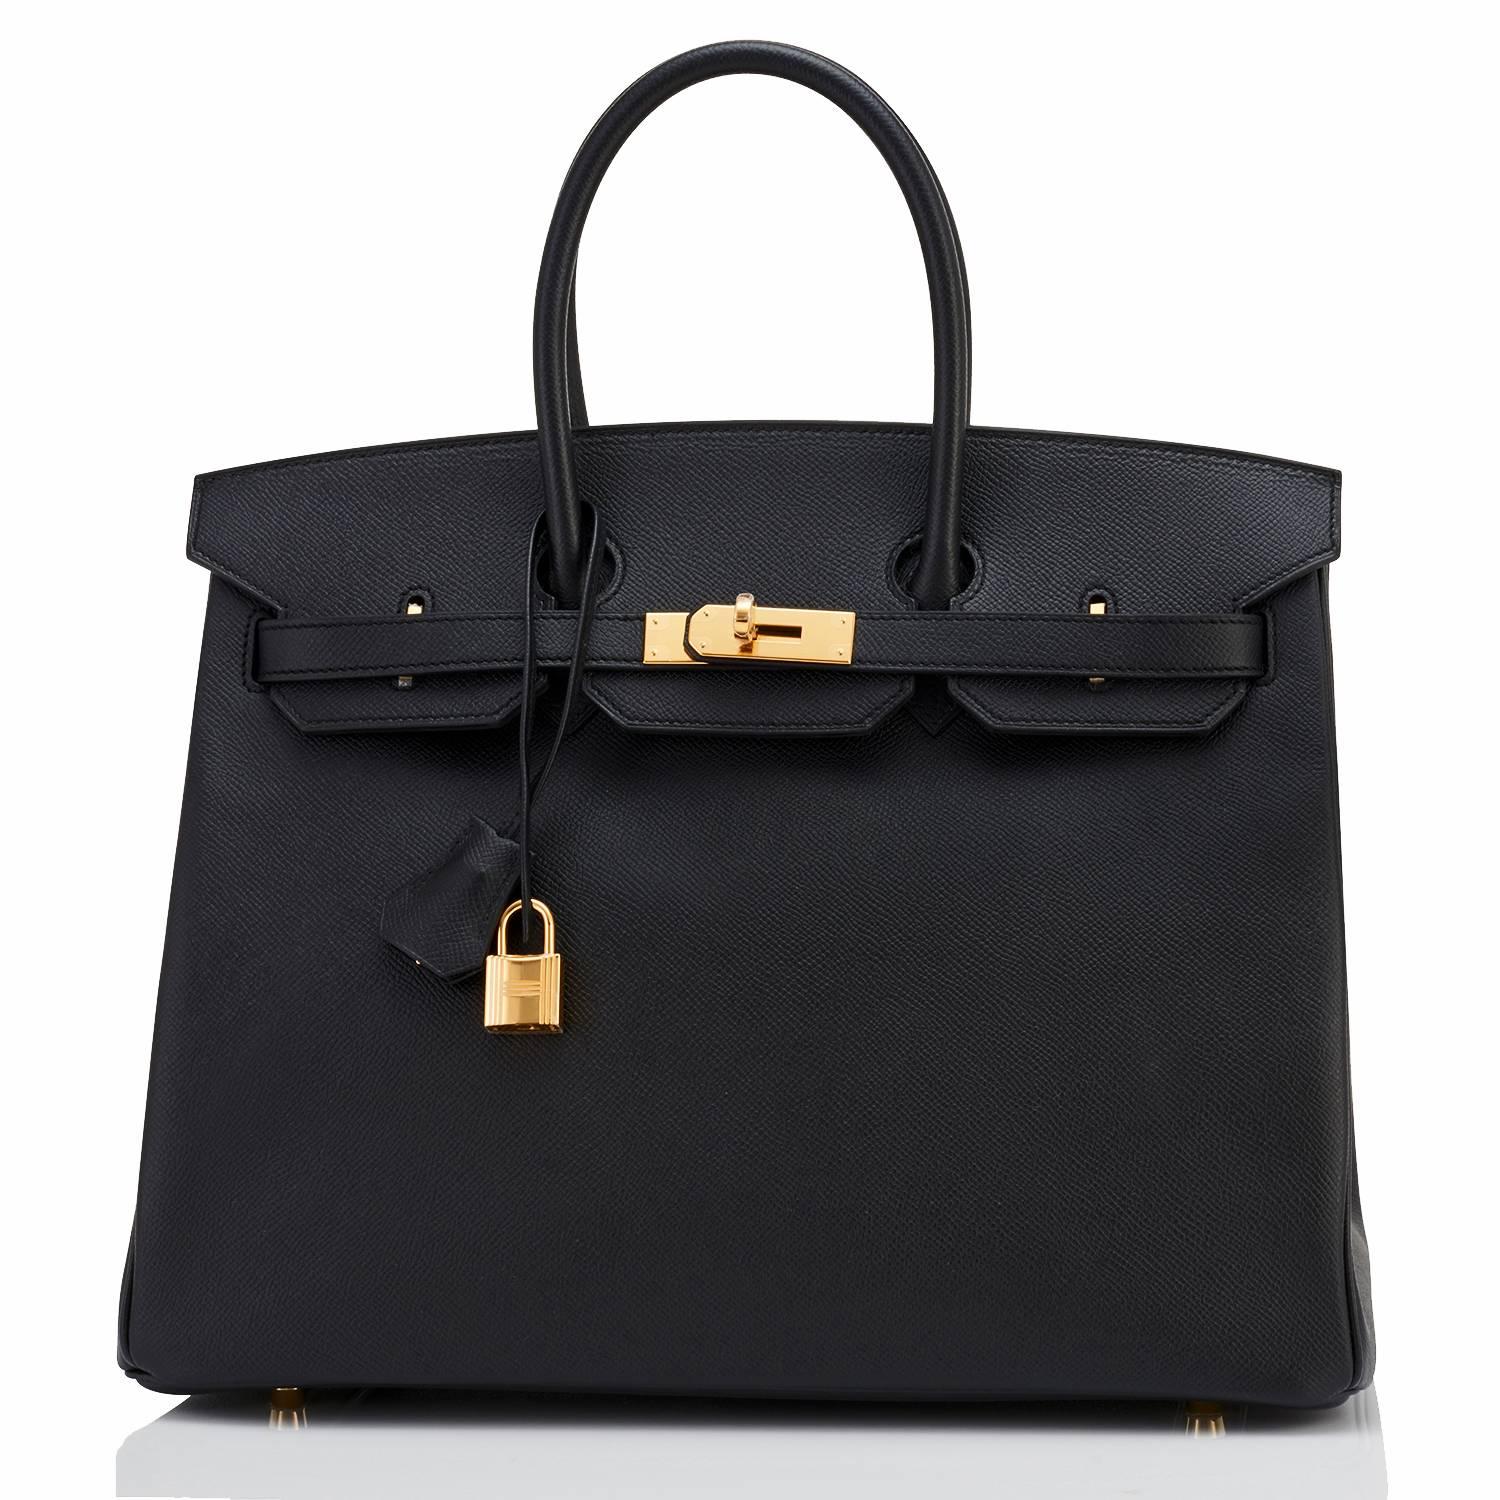 Hermes Black 35cm Birkin Gold Hardware Epsom Bag Power Birkin Y Stamp, 2020
Brand new in box. Store Fresh.  Pristine condition (with plastic on hardware).
Just purchased from Hermes store; bag bears new 2020 interior Y stamp.
Perfect gift! Comes